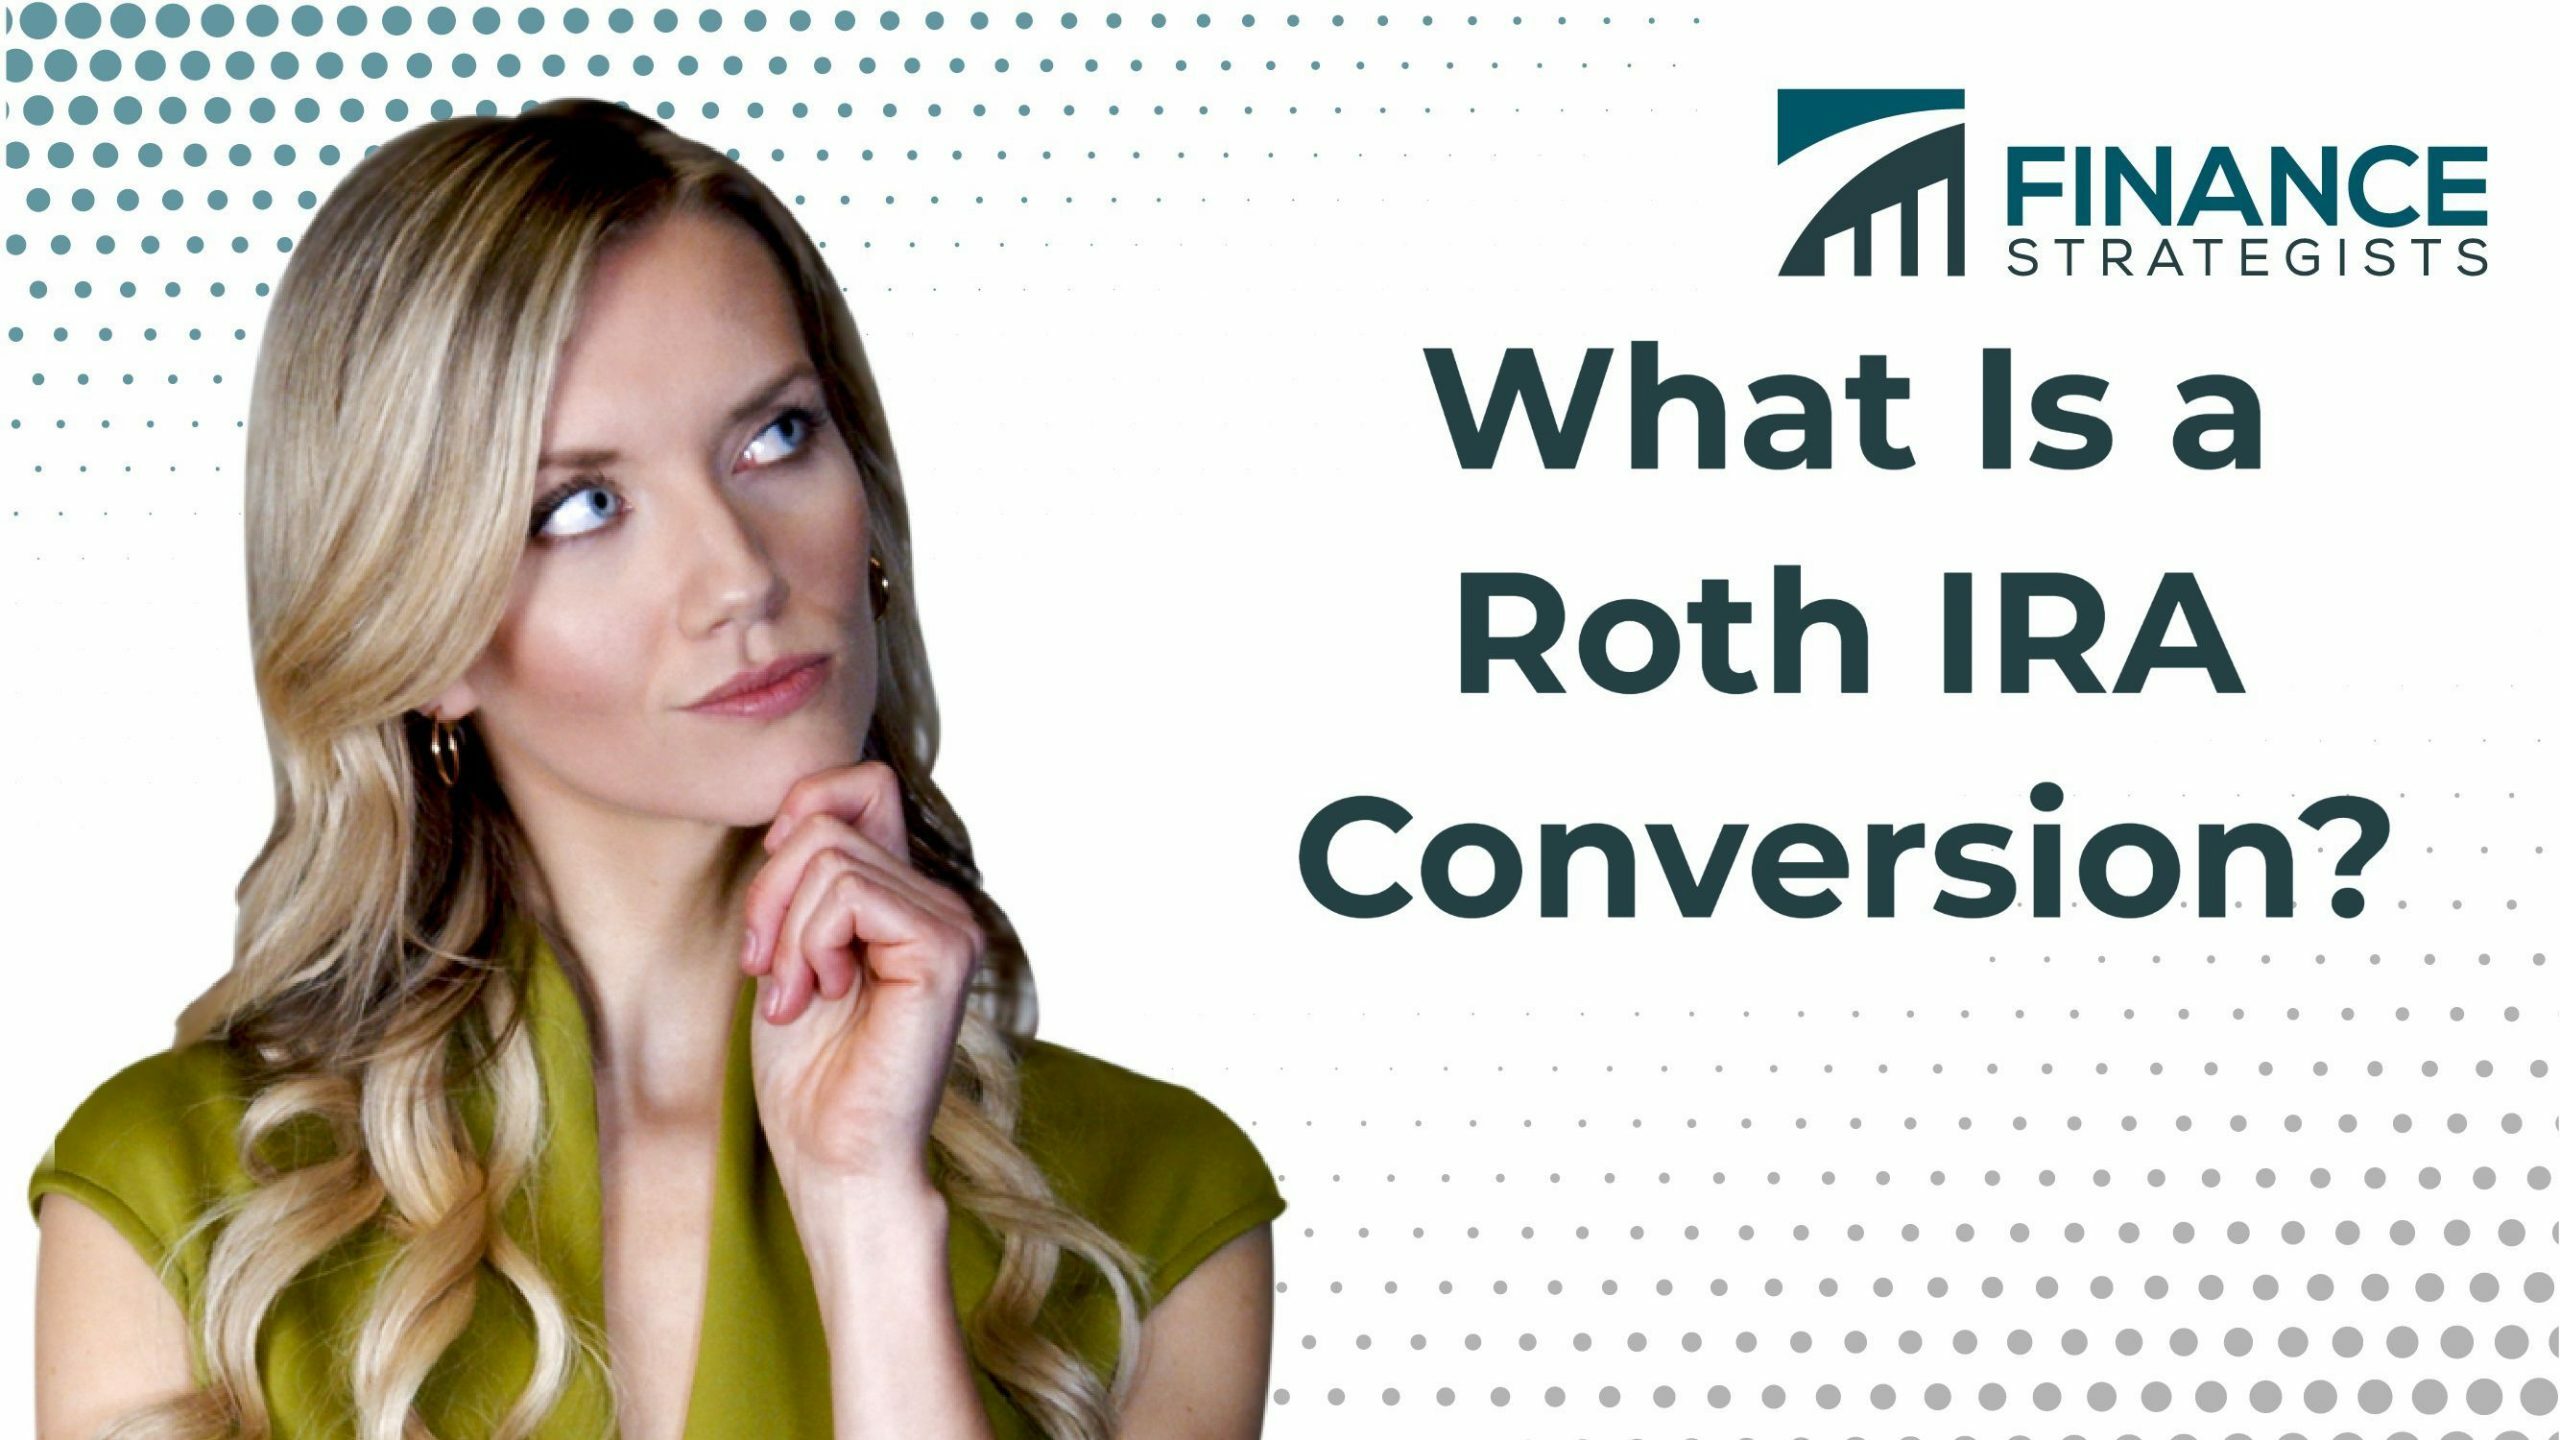 Roth IRA Conversion Definition, How to Do a Roth Conversion